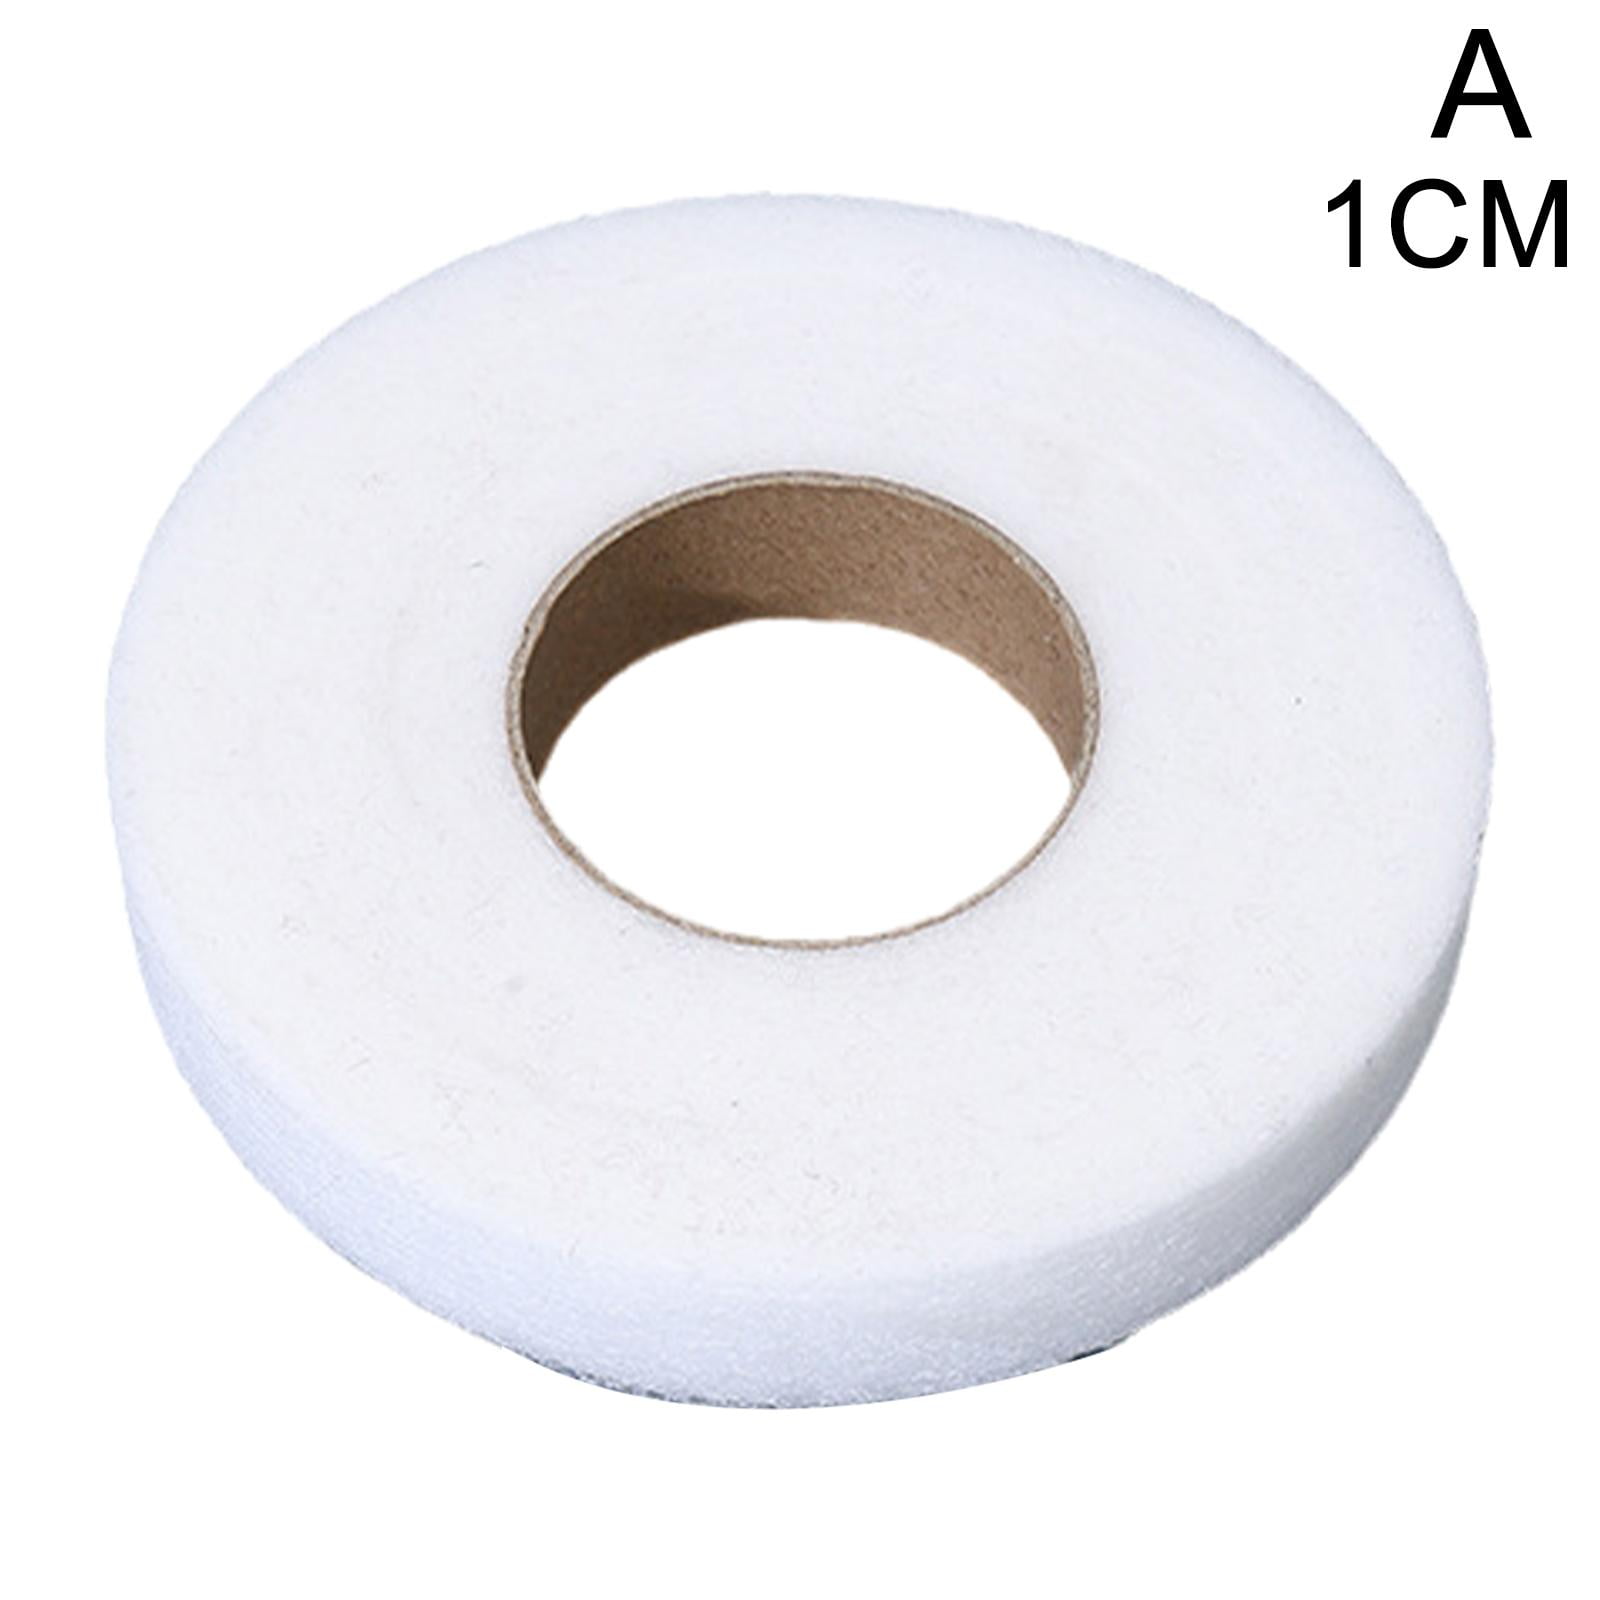 Sticky Fabric Tape Double-Sided Tape Adhesive Cloth Tape Press-on Tape, No  Sewing, Gluing, or Ironing, Alterations and Hemming Tool (20 Meters,1) 